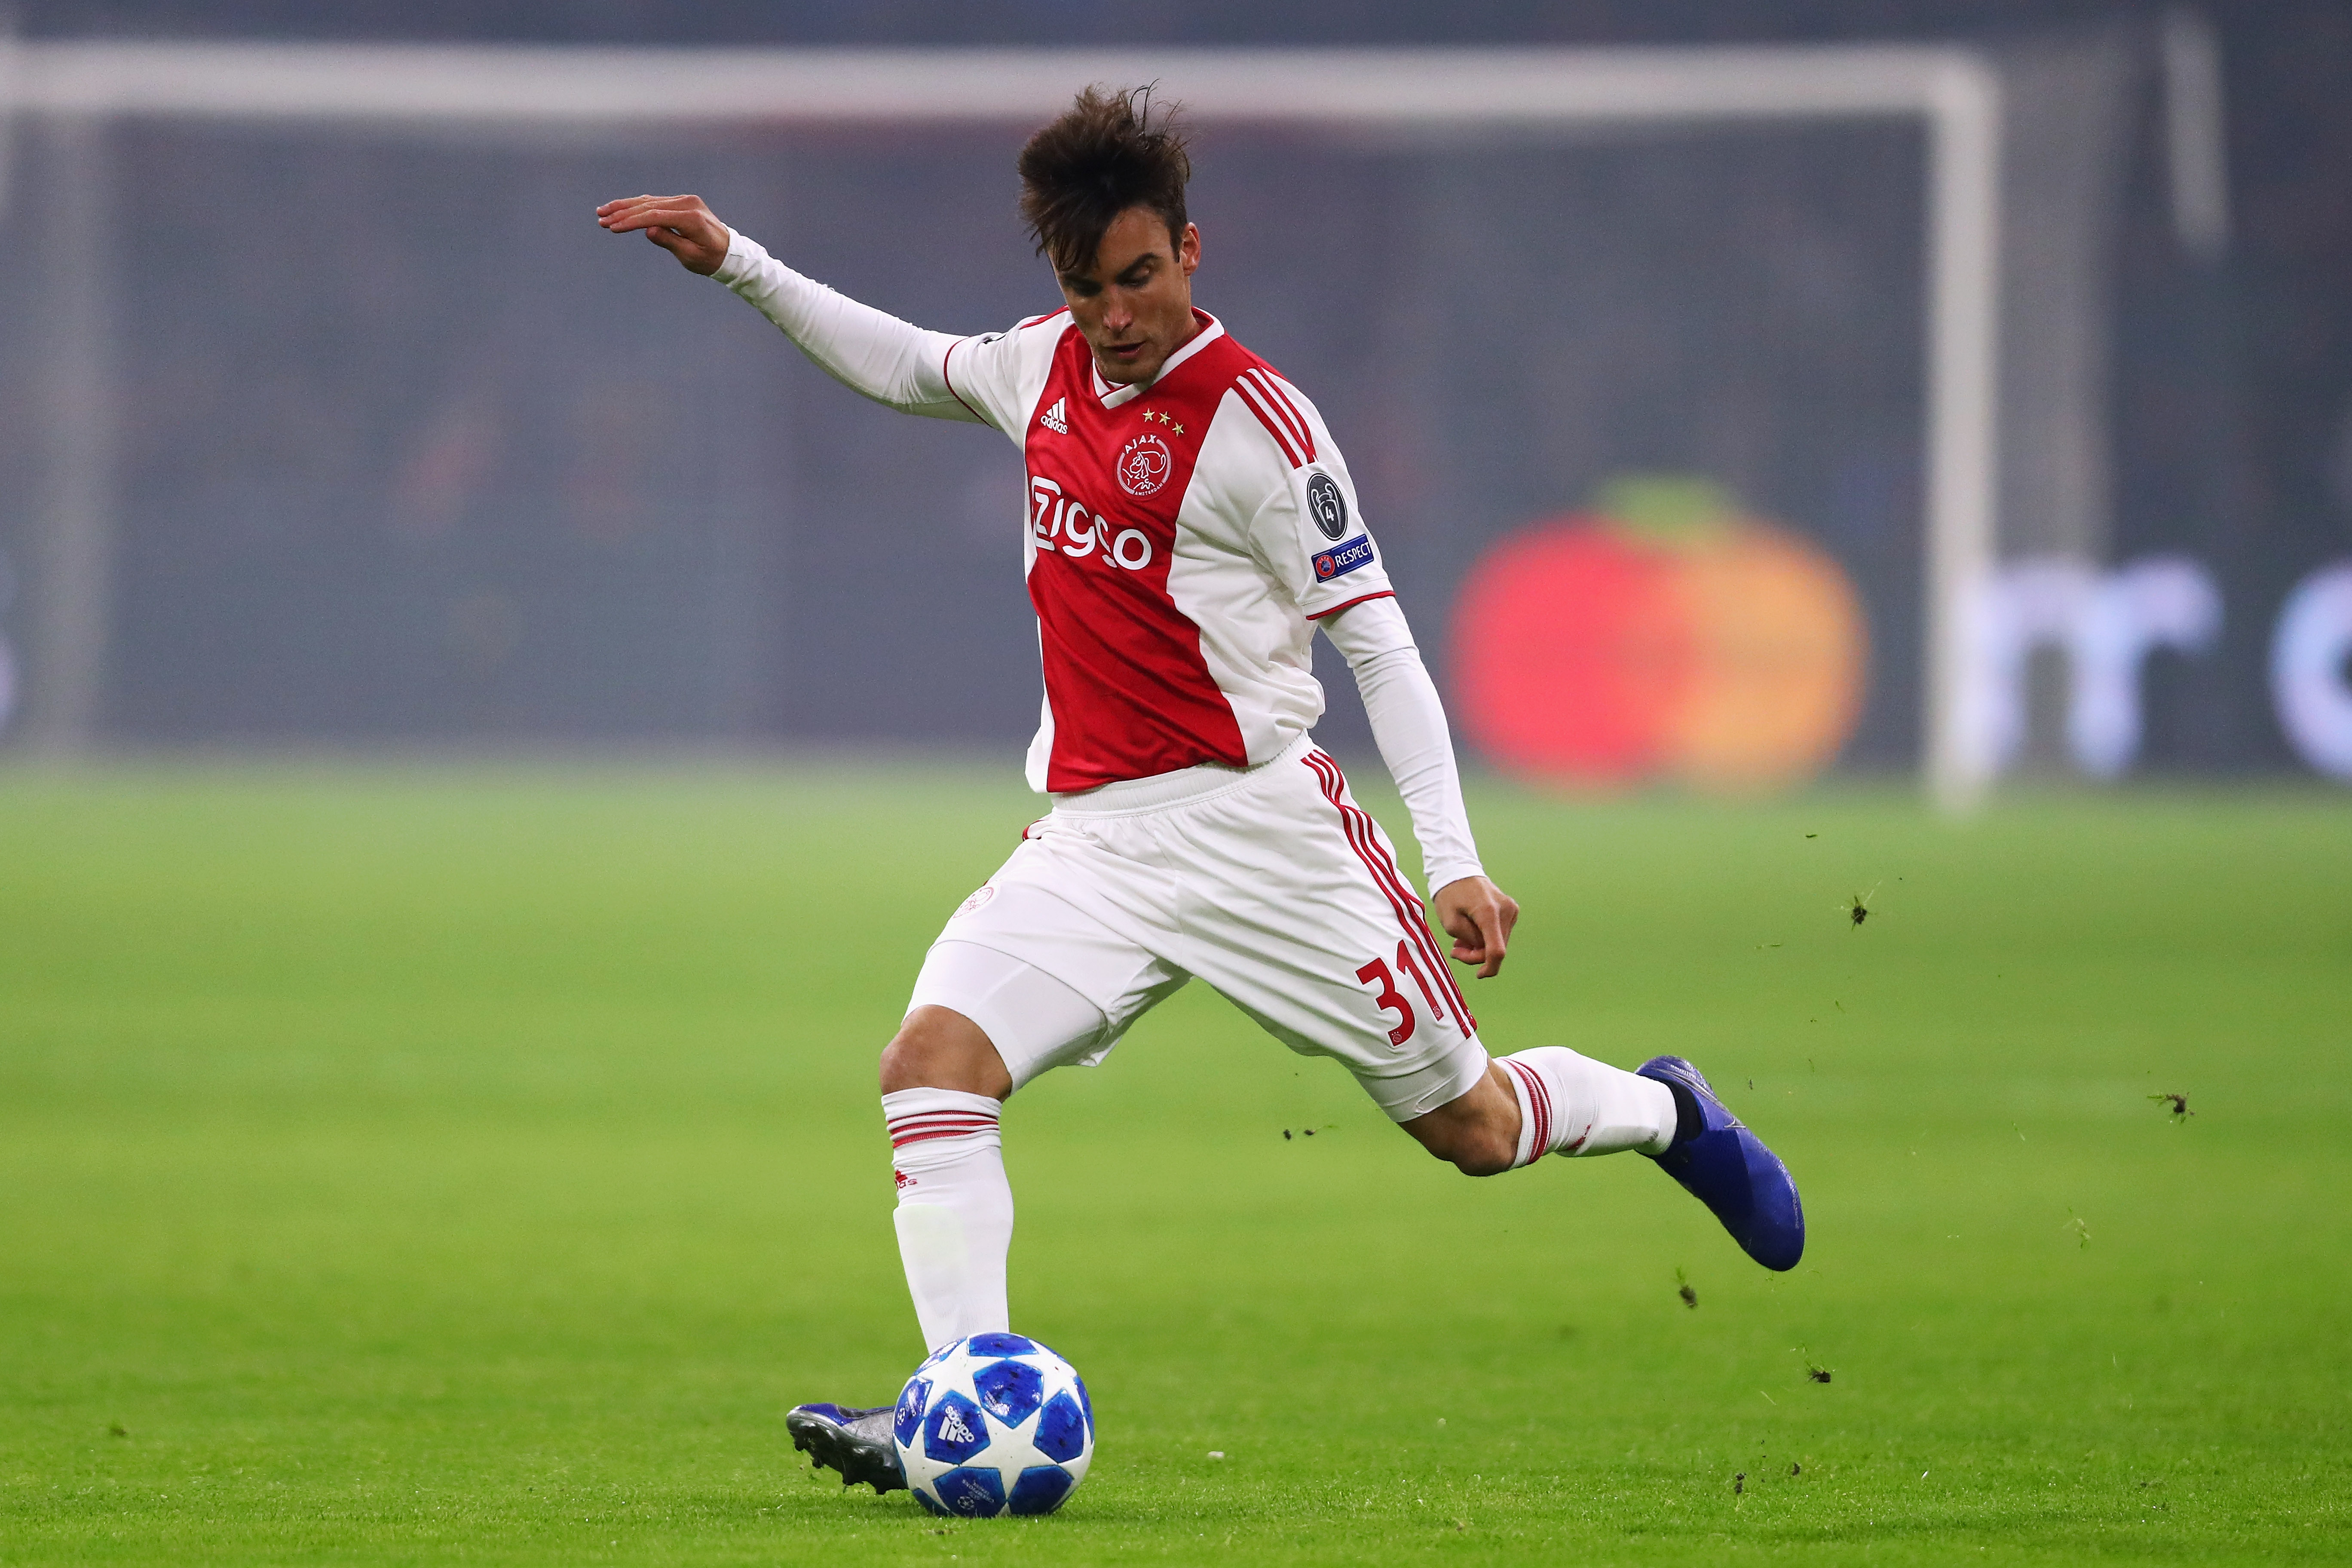 AMSTERDAM, NETHERLANDS - DECEMBER 12:  Nicolas Tagliafico of Ajax in action during the UEFA Champions League Group E match between Ajax and FC Bayern Munich at Johan Cruyff Arena on December 12, 2018 in Amsterdam, Netherlands.  (Photo by Dean Mouhtaropoulos/Getty Images)